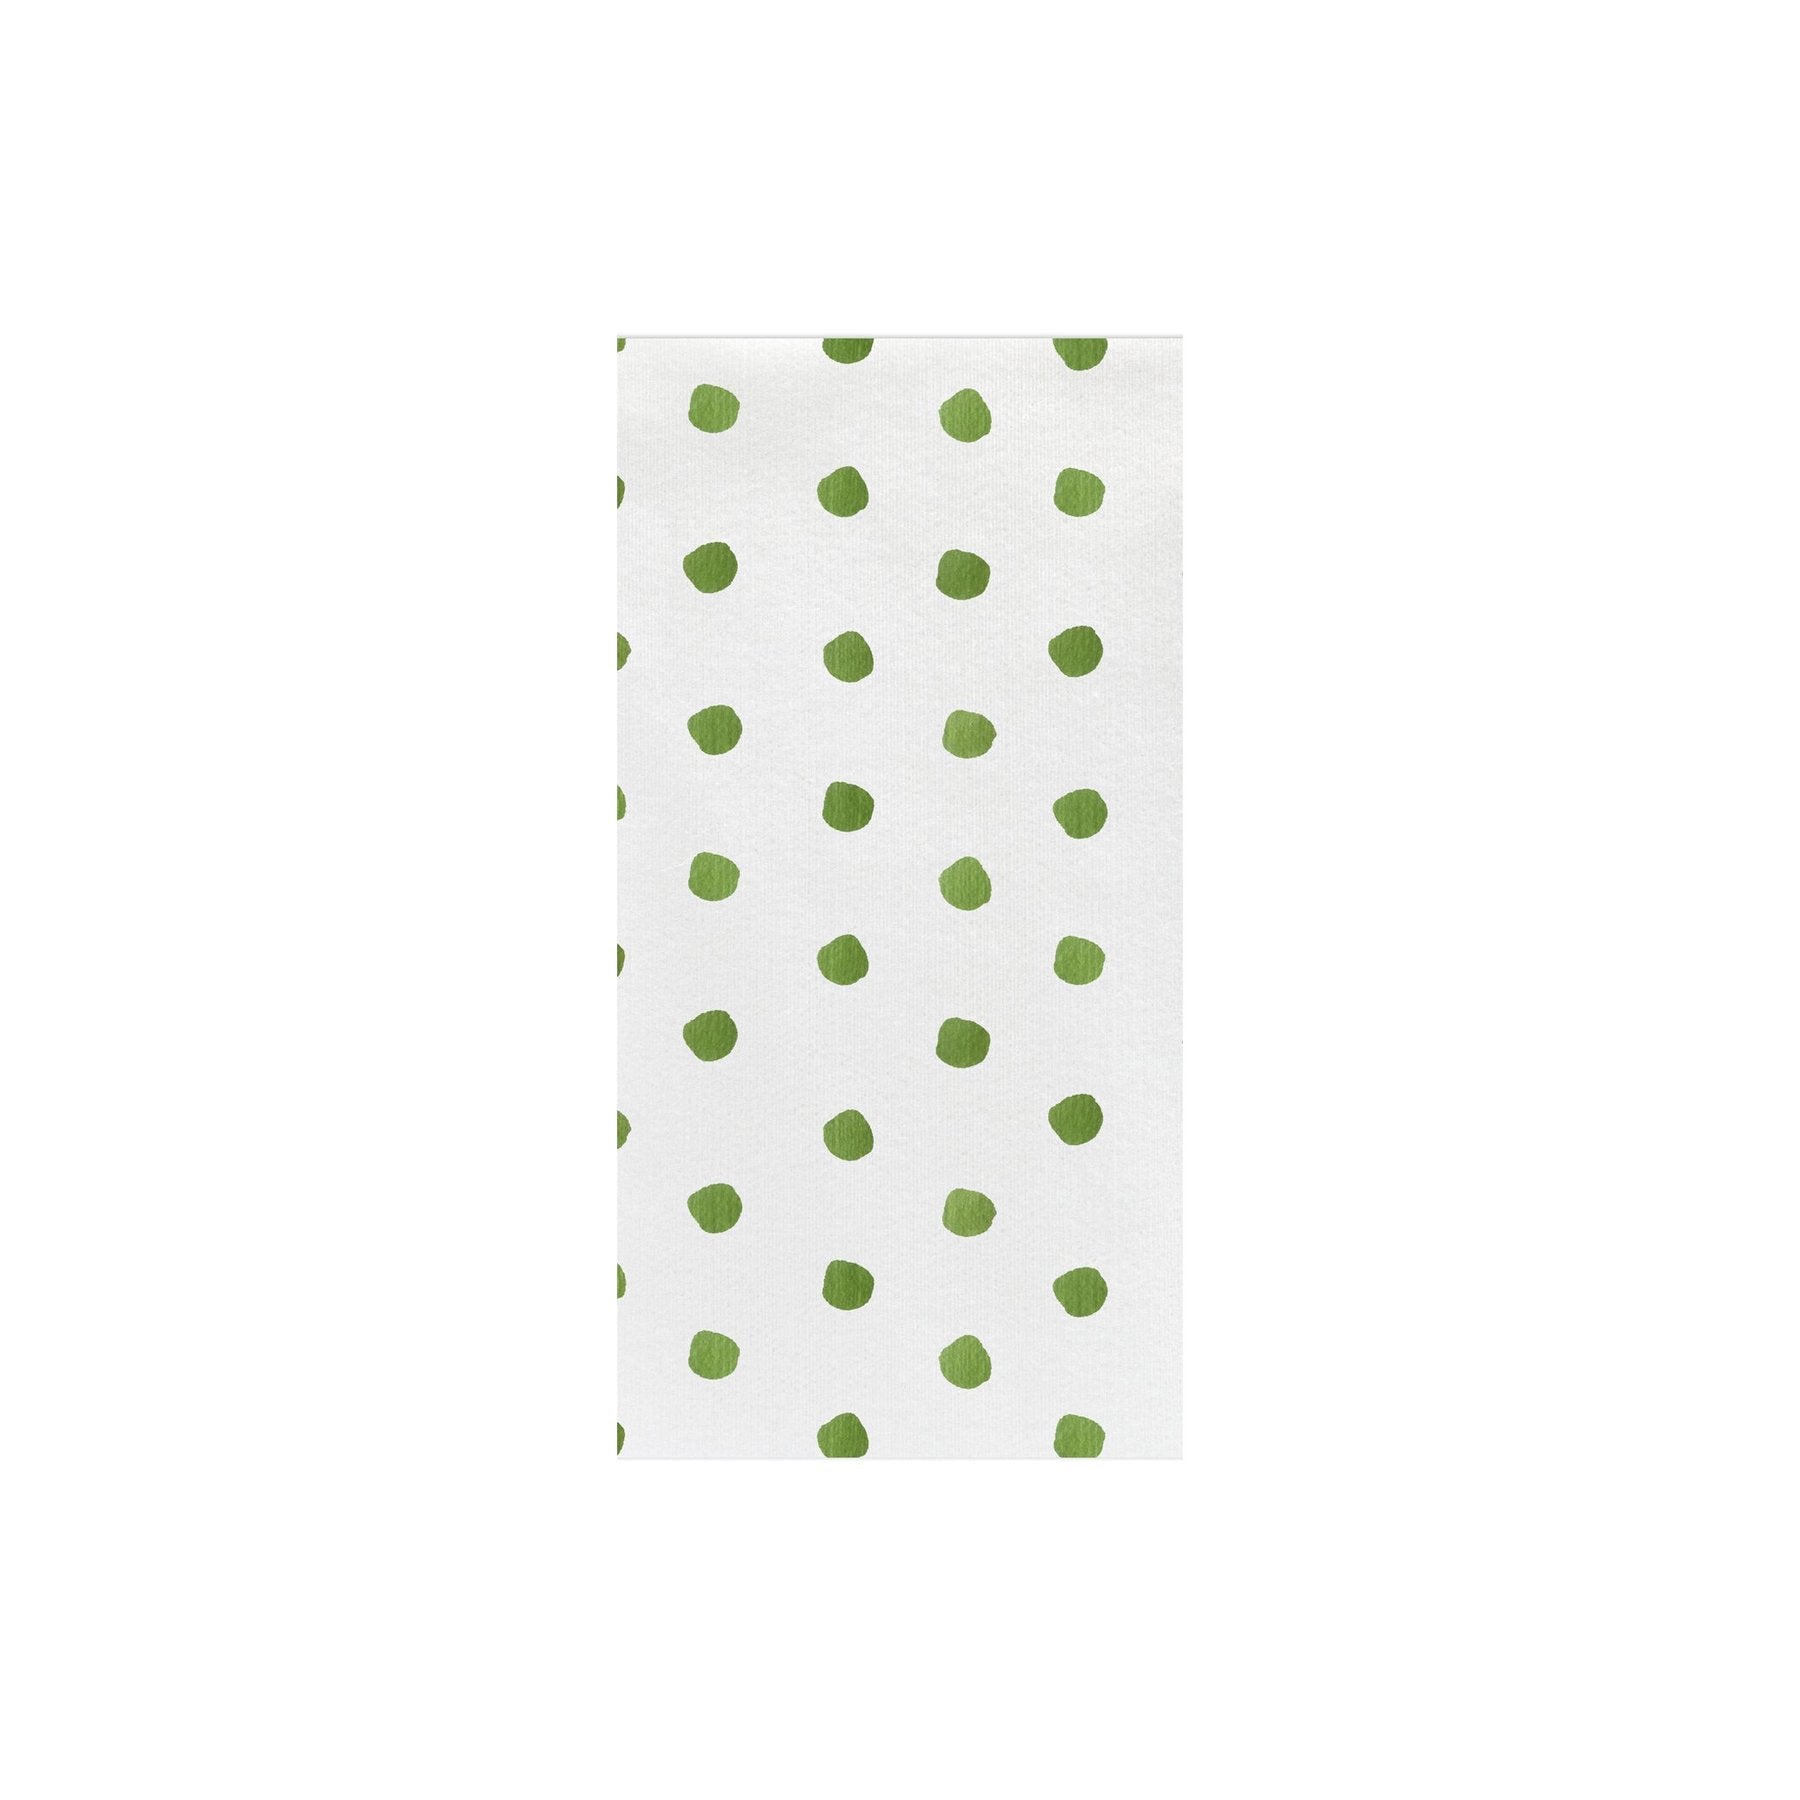 Papersoft Napkins Green Dot Guest Towels - Pack of 50